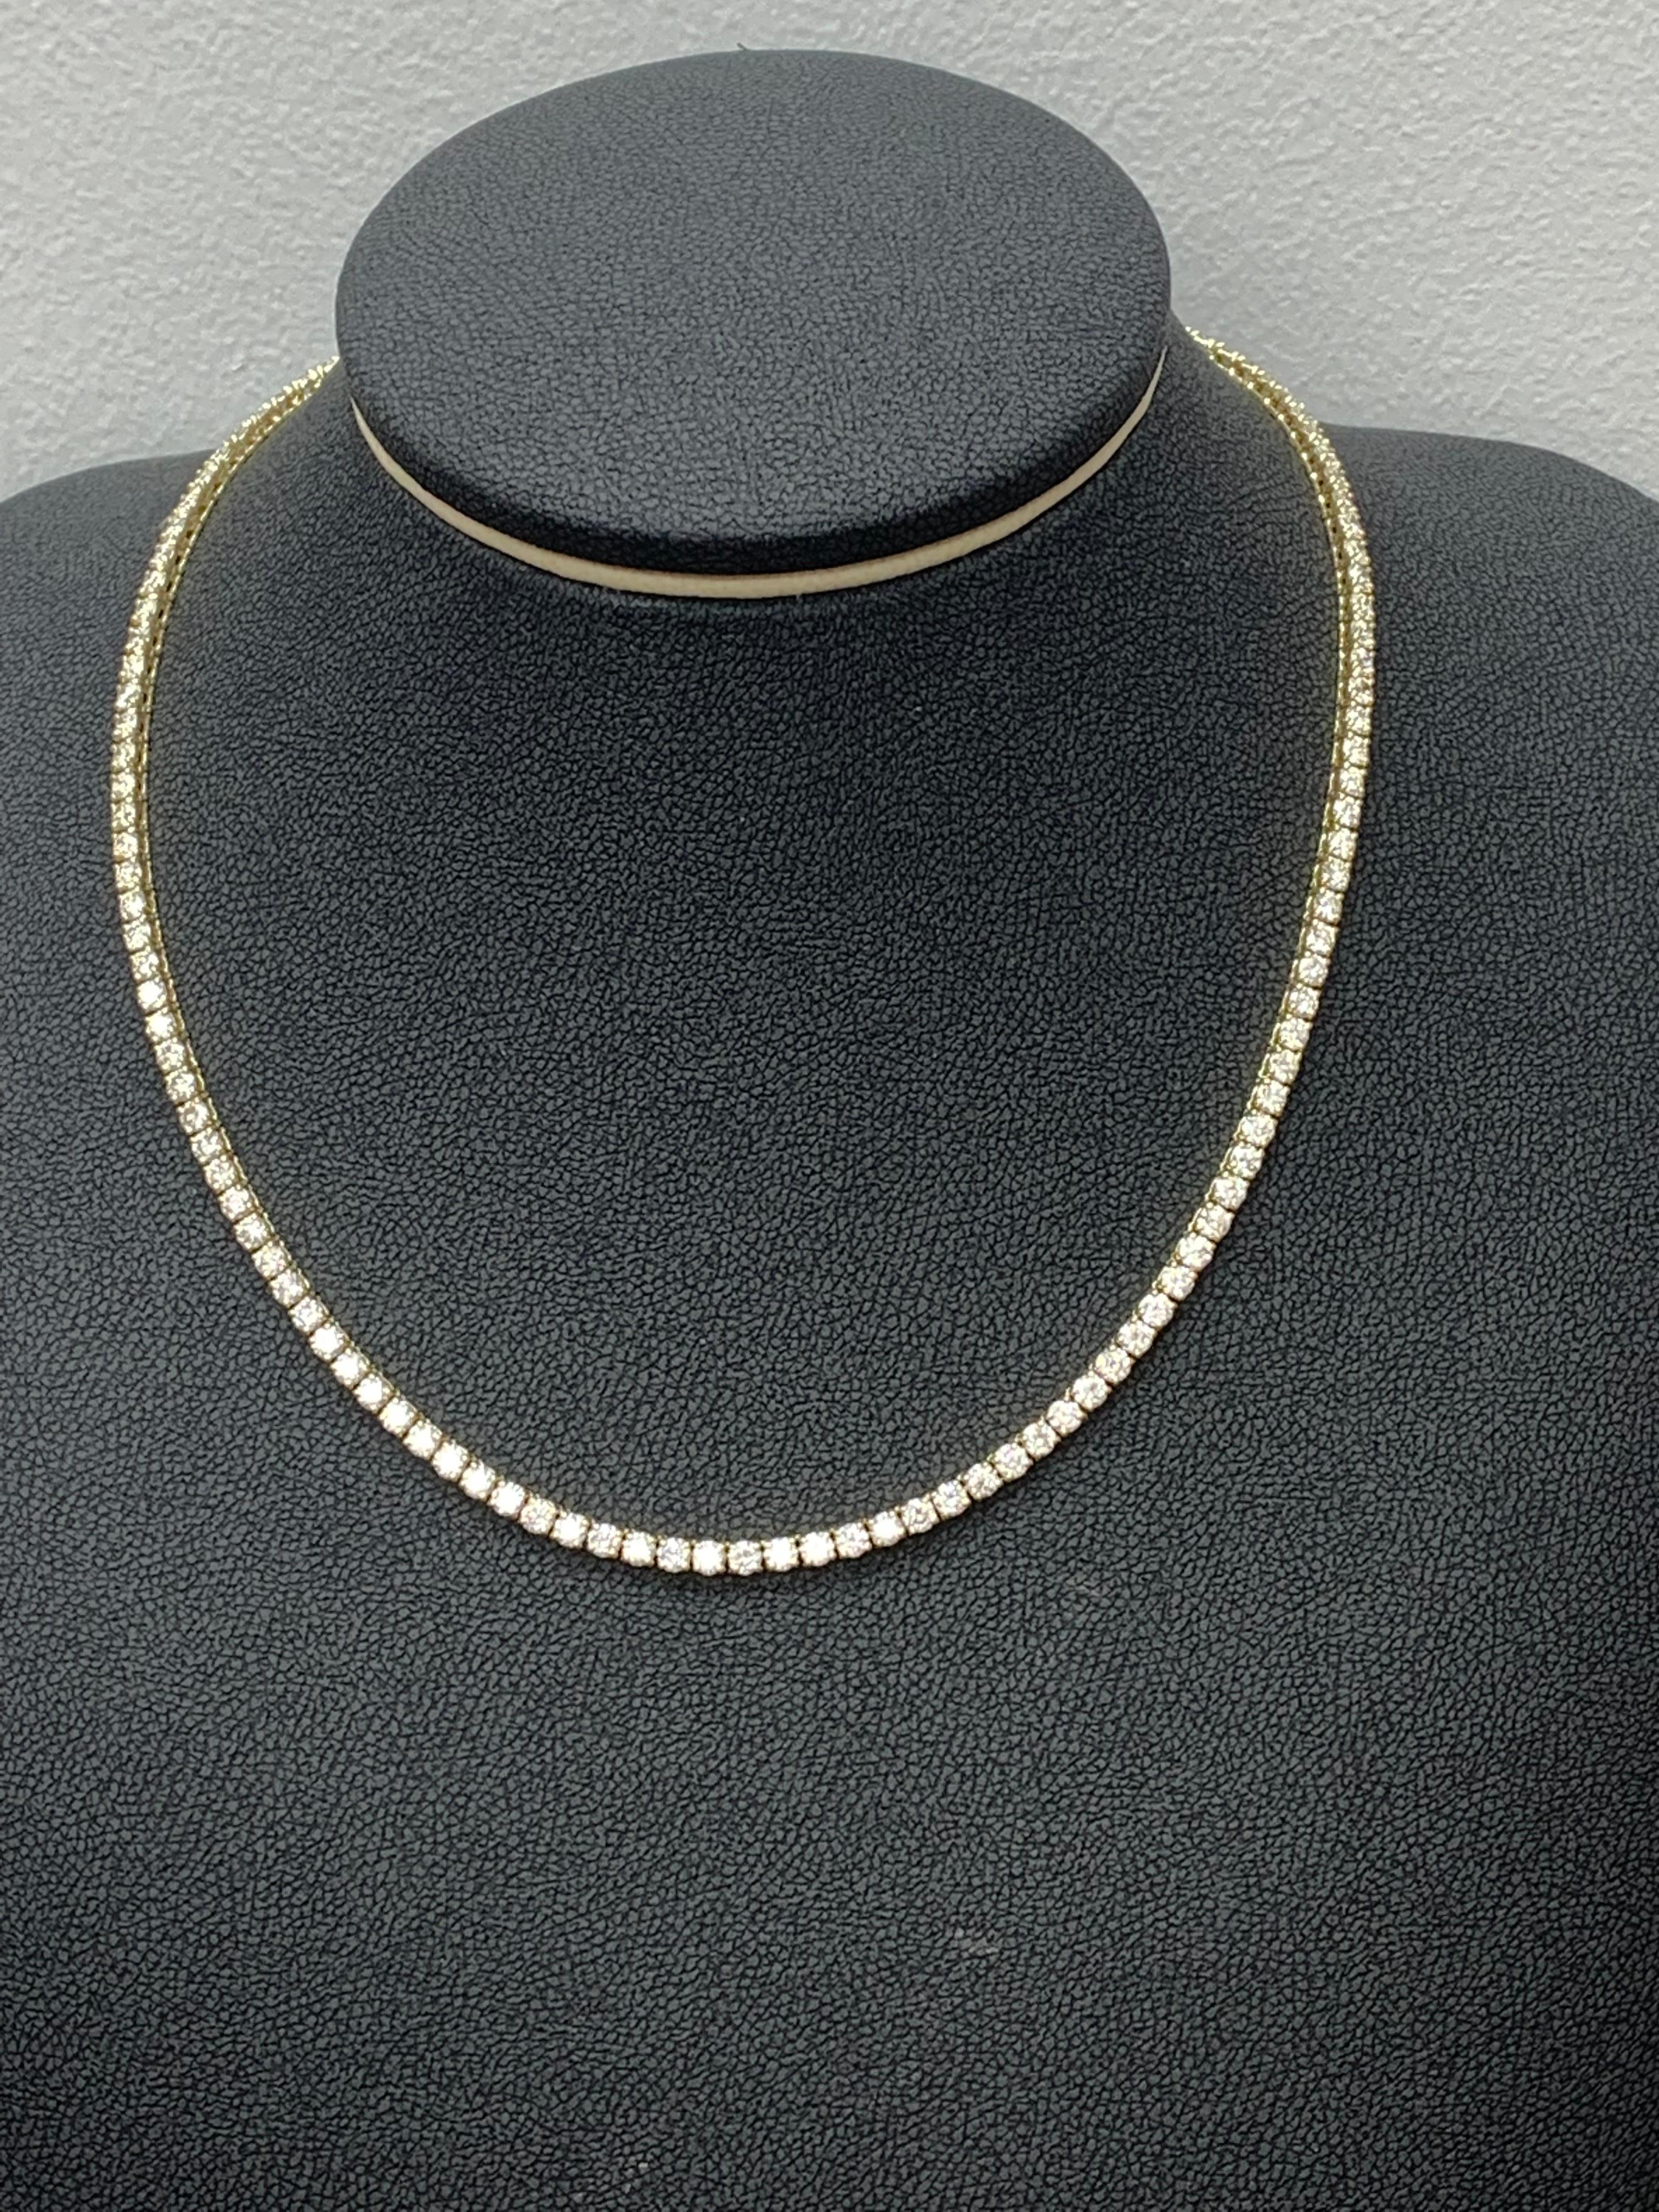 Women's 13.01 Carat Diamond Tennis Necklace in 14K Yellow Gold For Sale